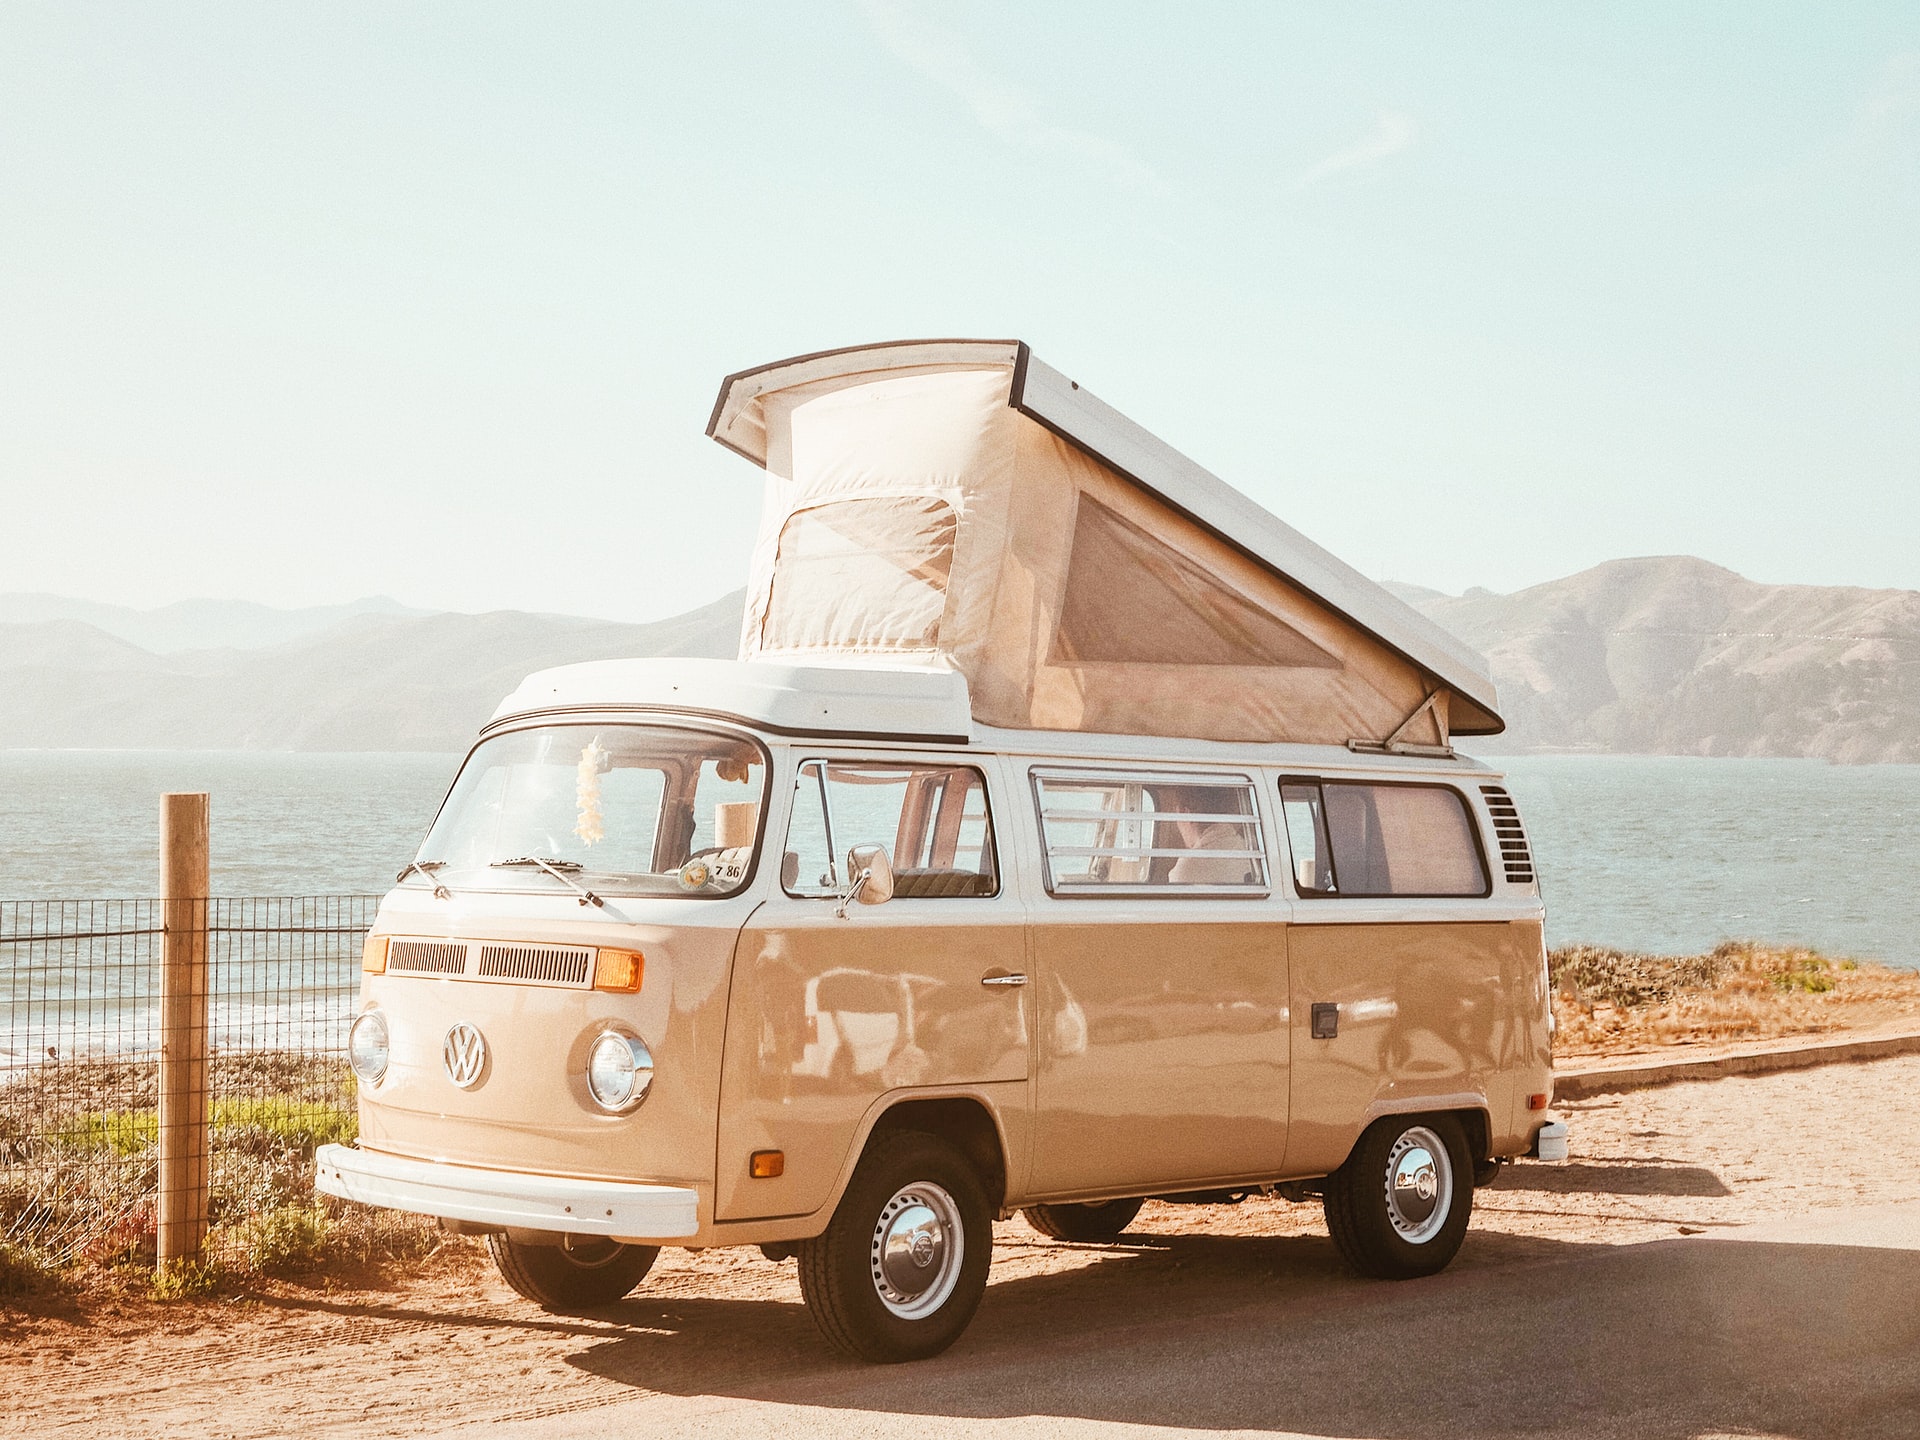 The Top 5 Tips You’ll Need for a Camper Van Trip